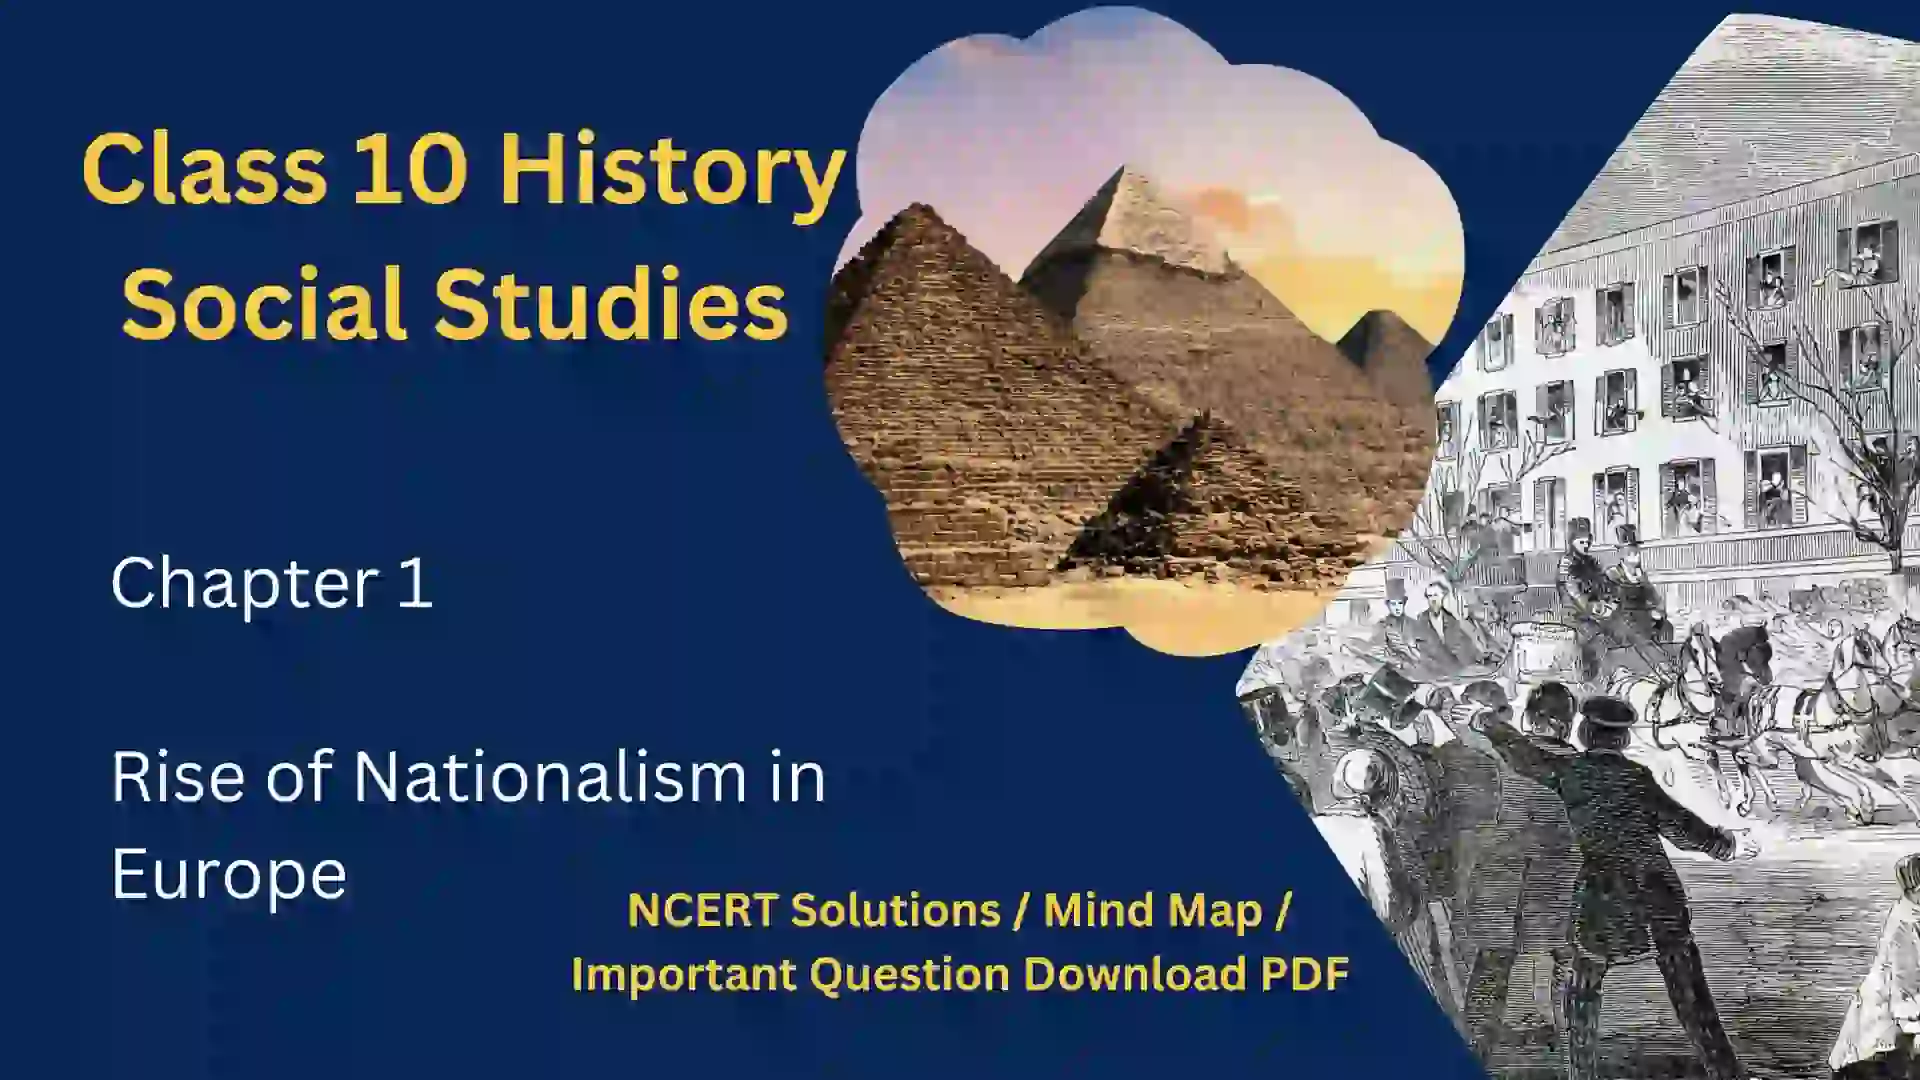 Class 10 Social Studies History Chapter 1